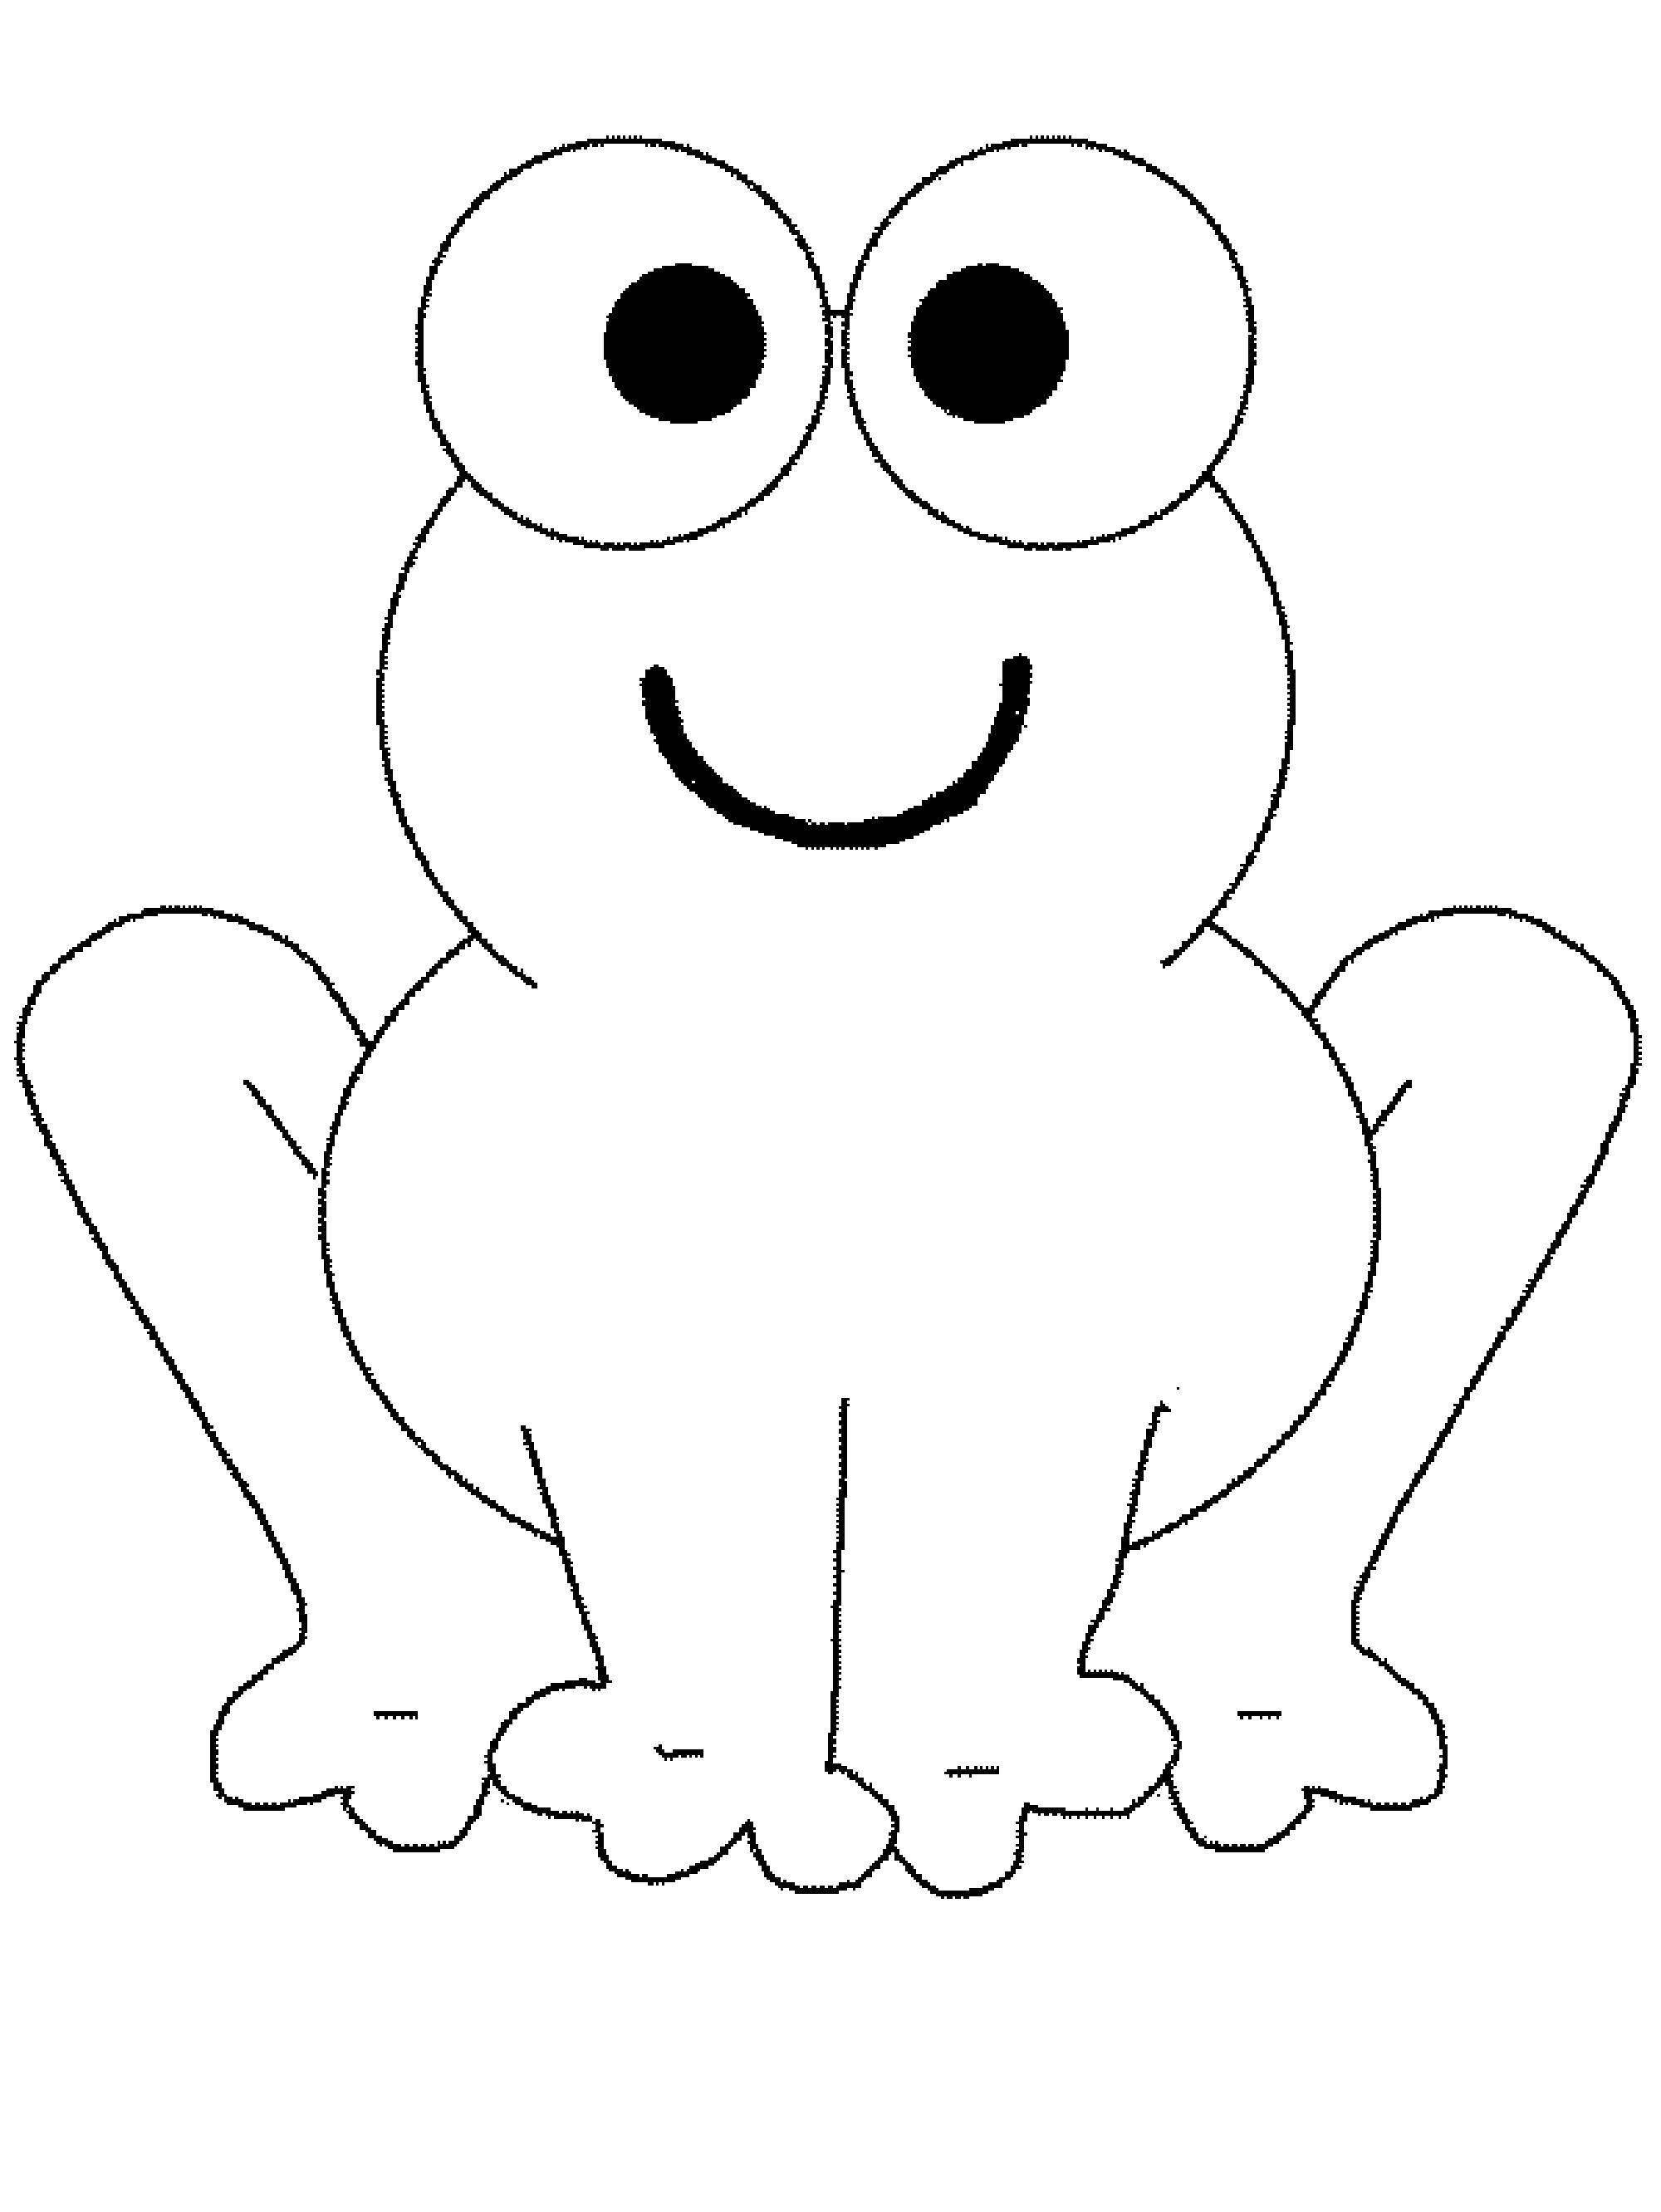 Coloring Frog. Category Coloring pages for kids. Tags:  Reptile, frog.